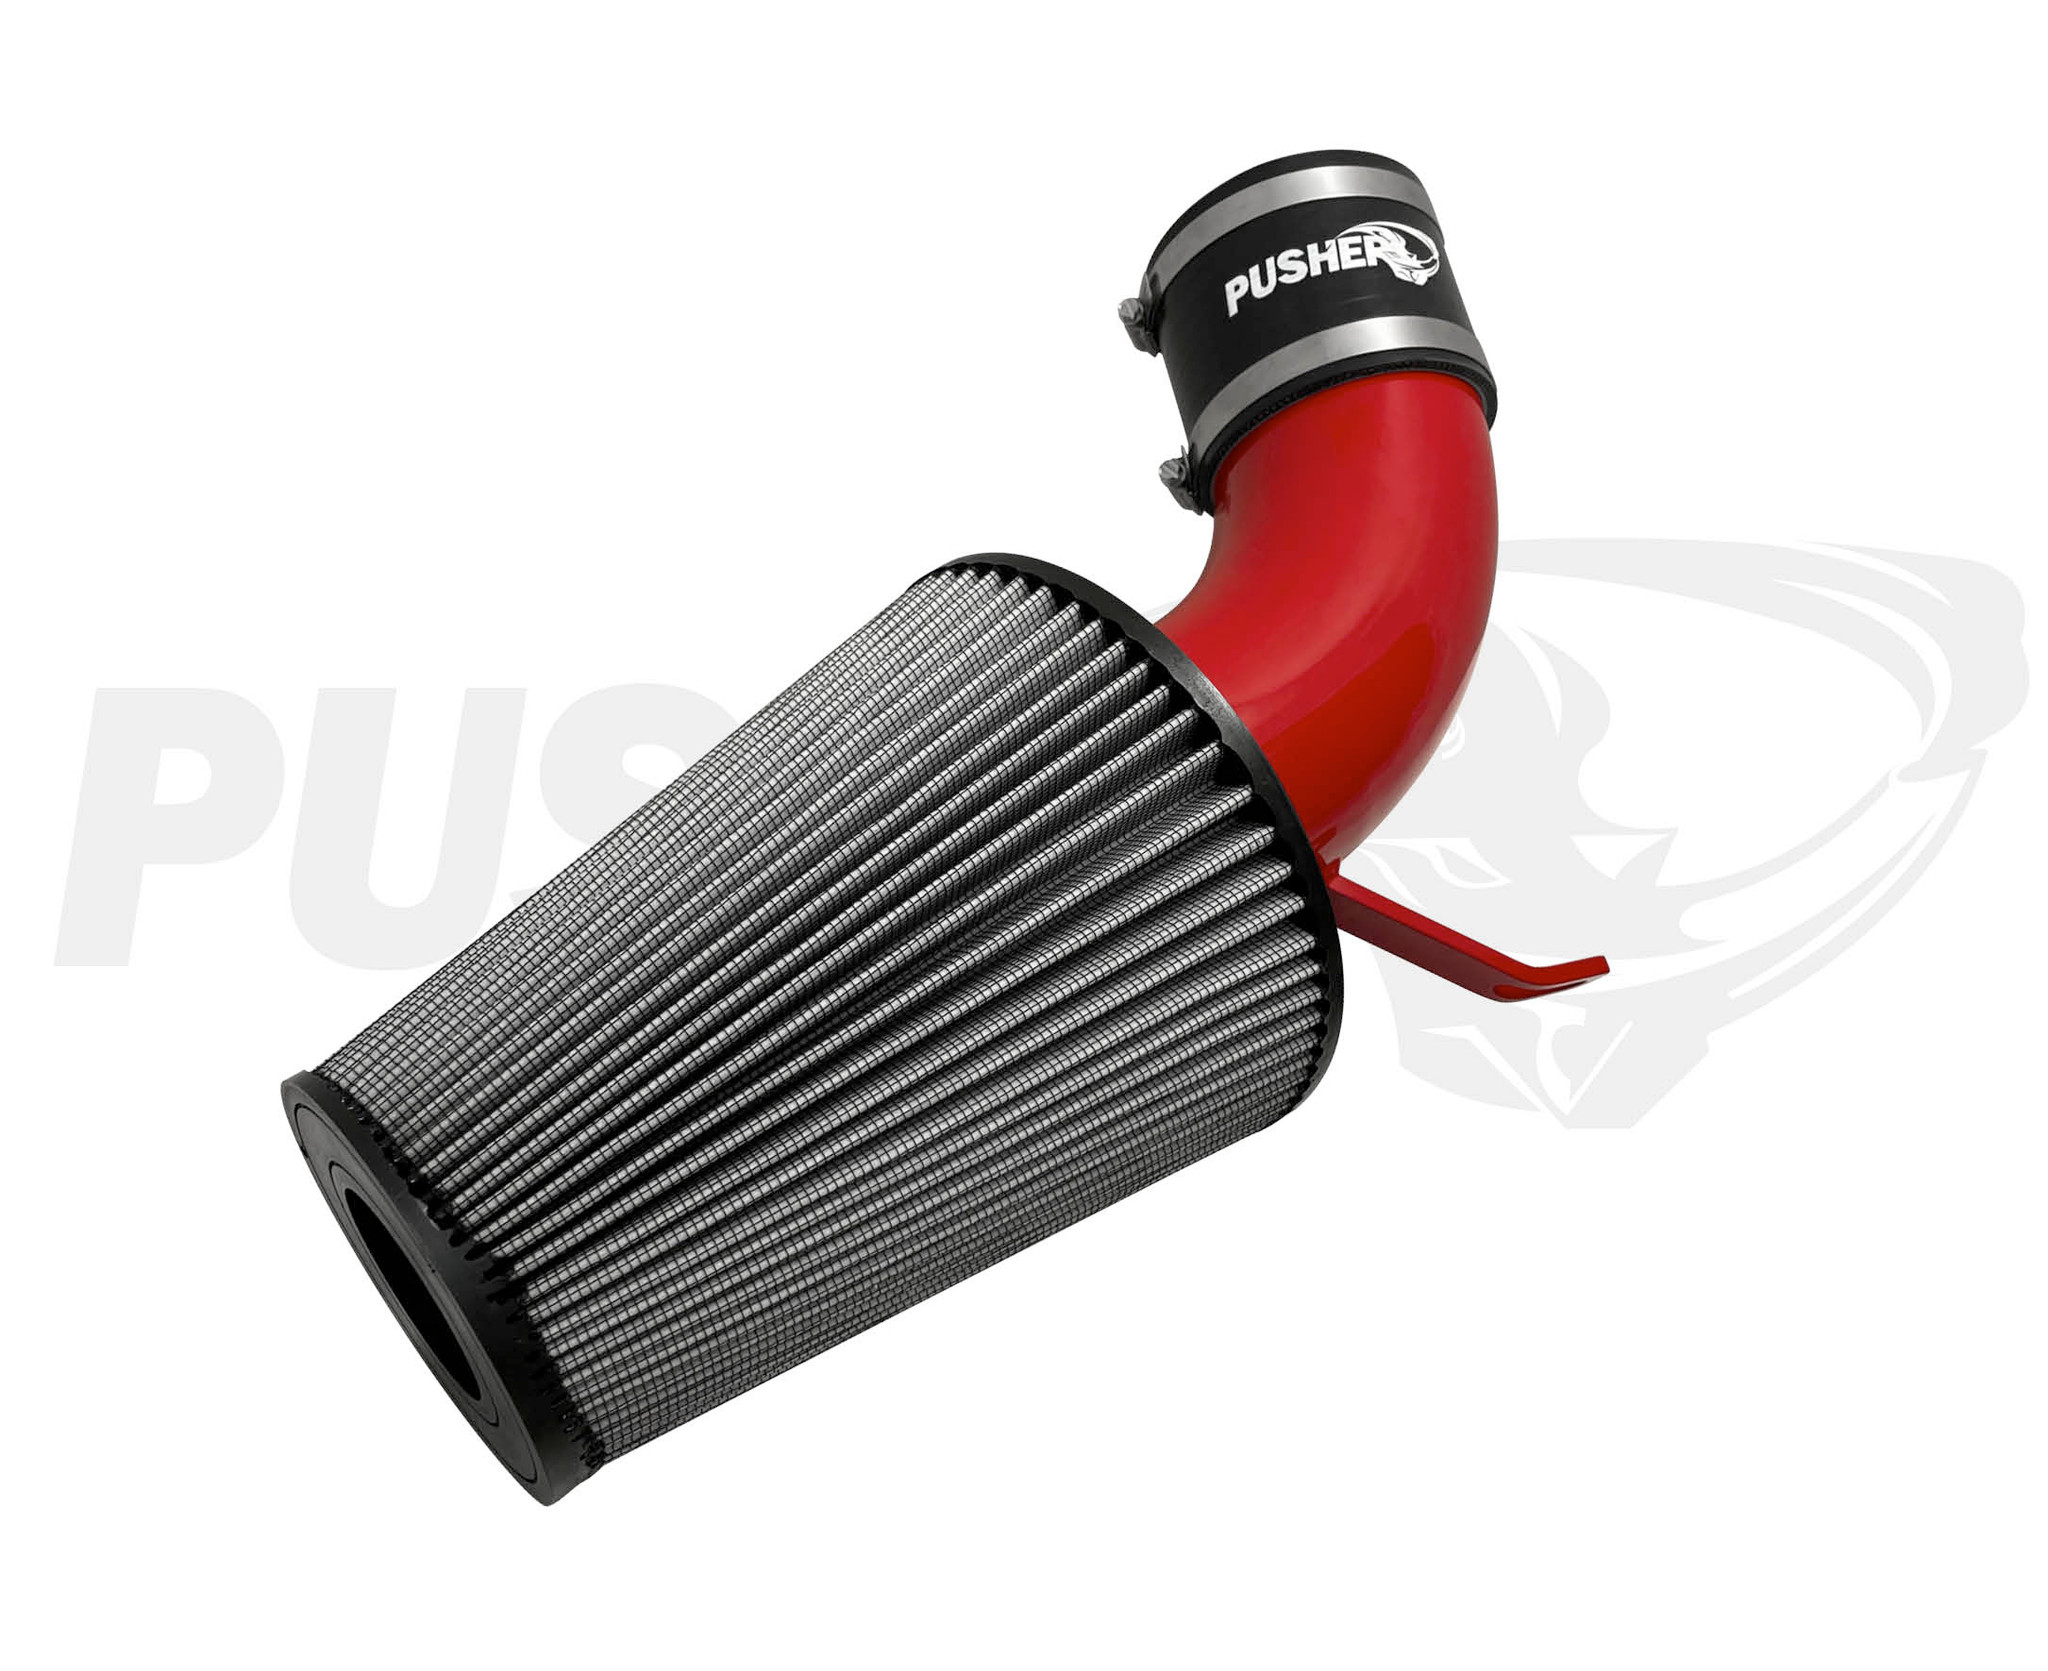 Pusher Front Mount Cold Air Intake System for 1989-1991 Dodge Cummins